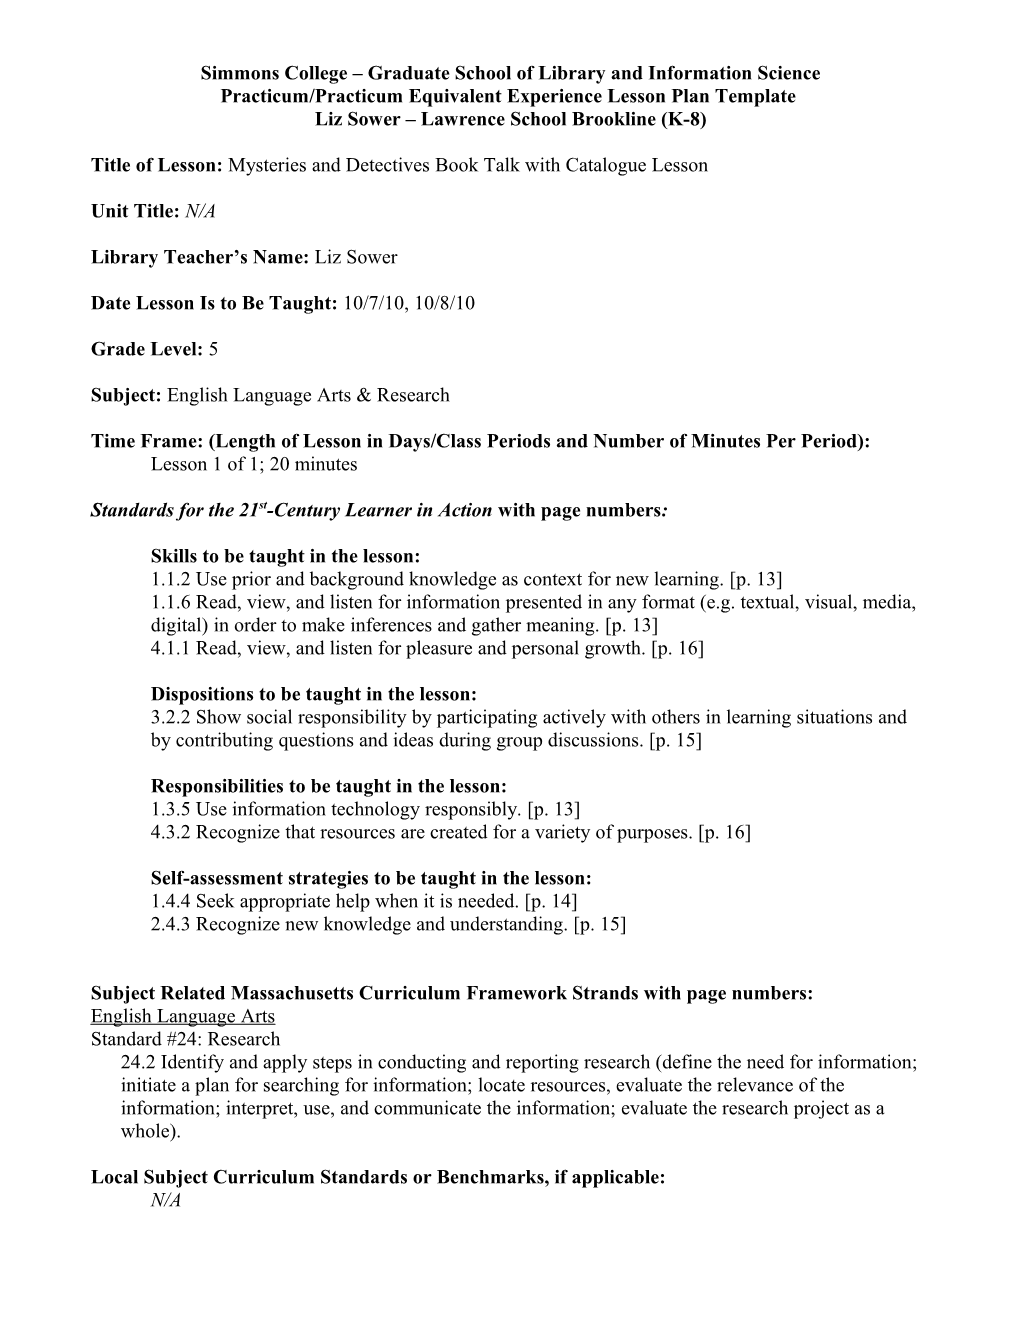 Lesson Plan Template LIS 431 Instructional Strategies for Effective Teaching and Learning